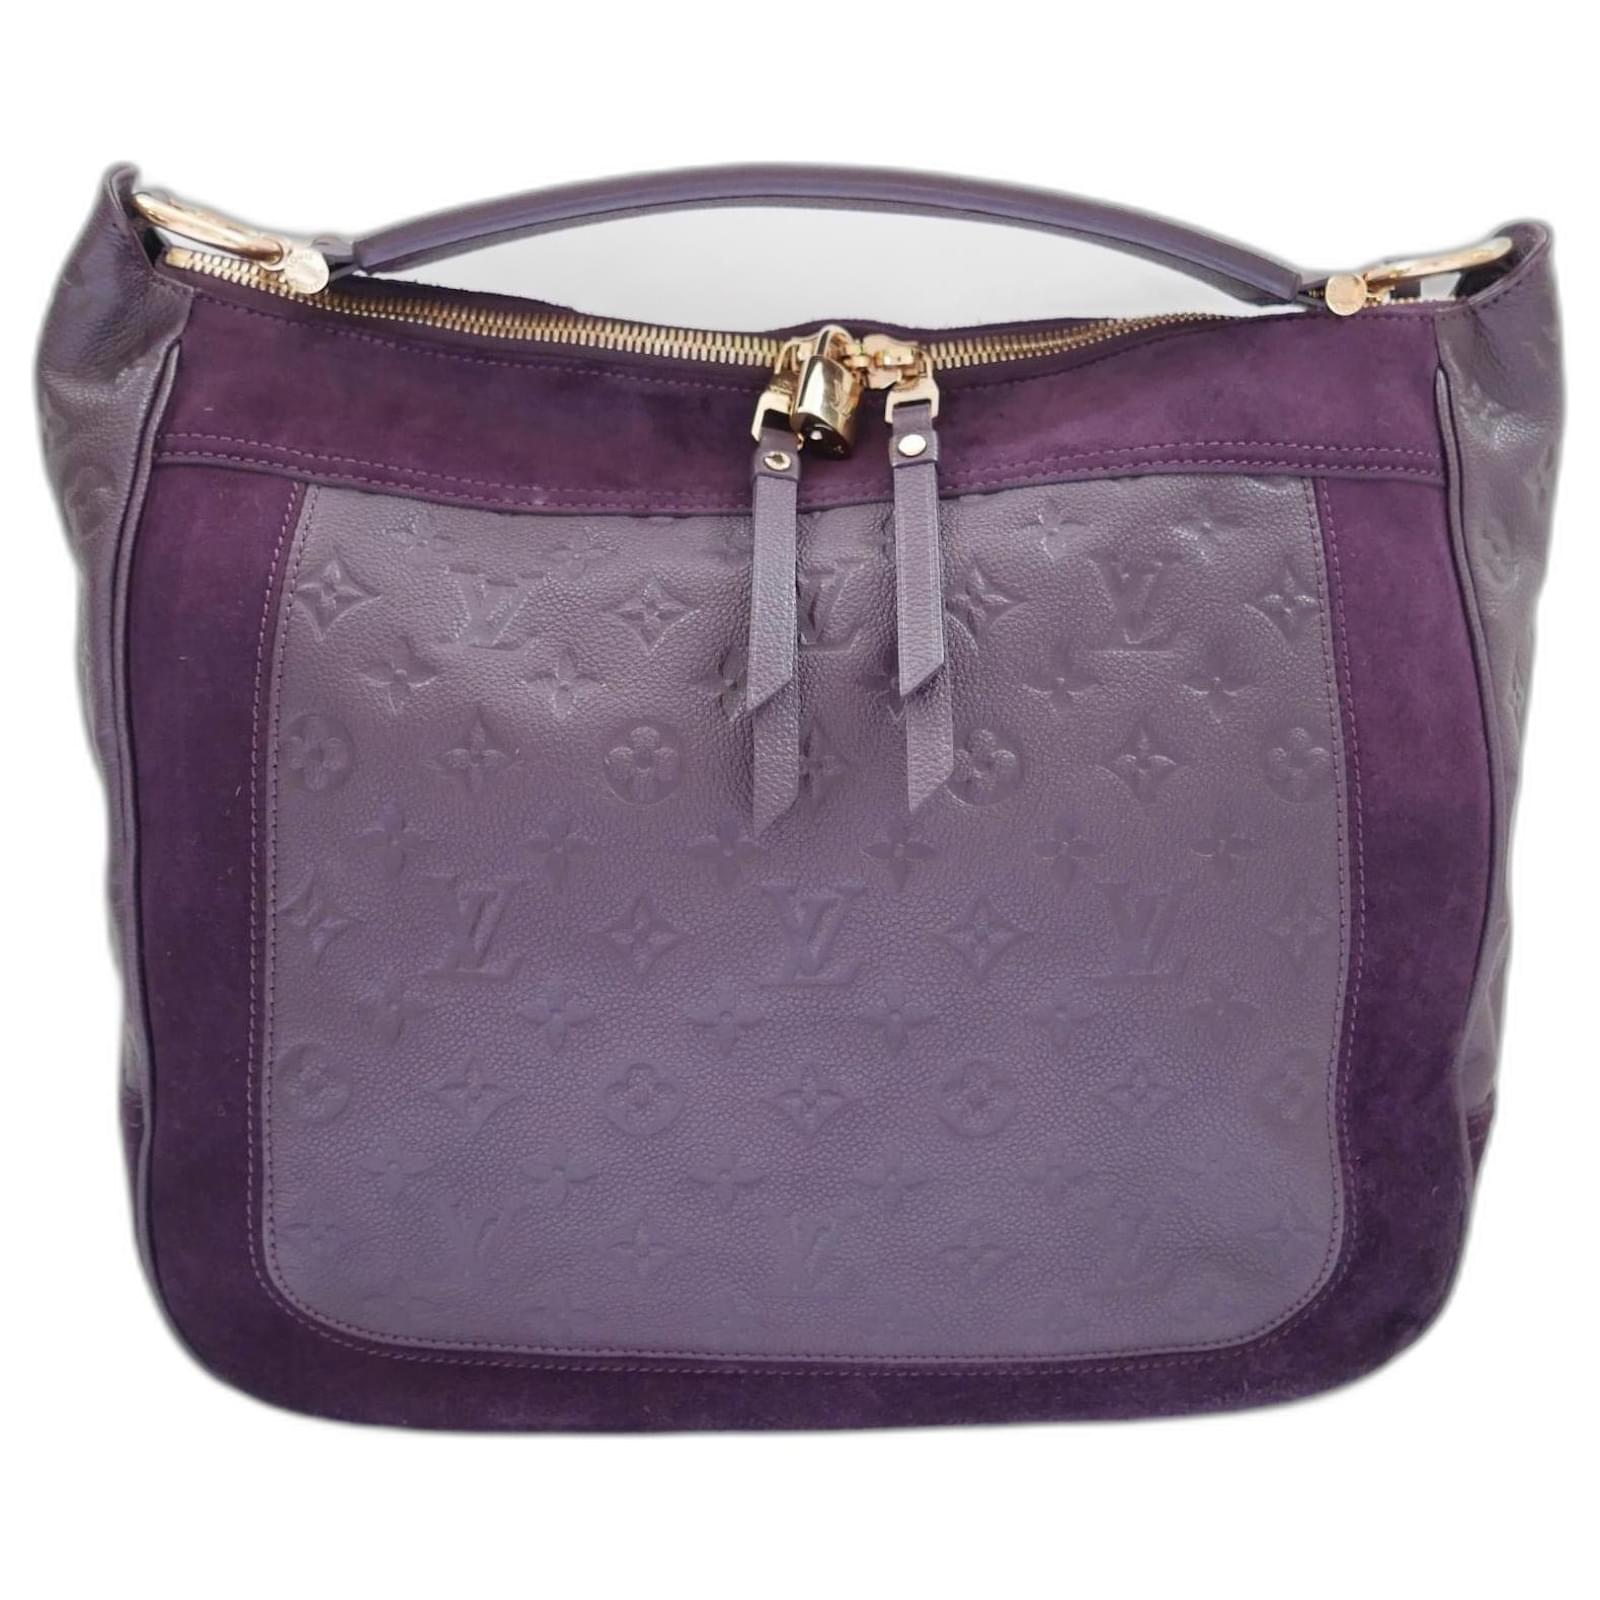 Louis Vuitton Embroidered Tote Bags & Handbags for Women